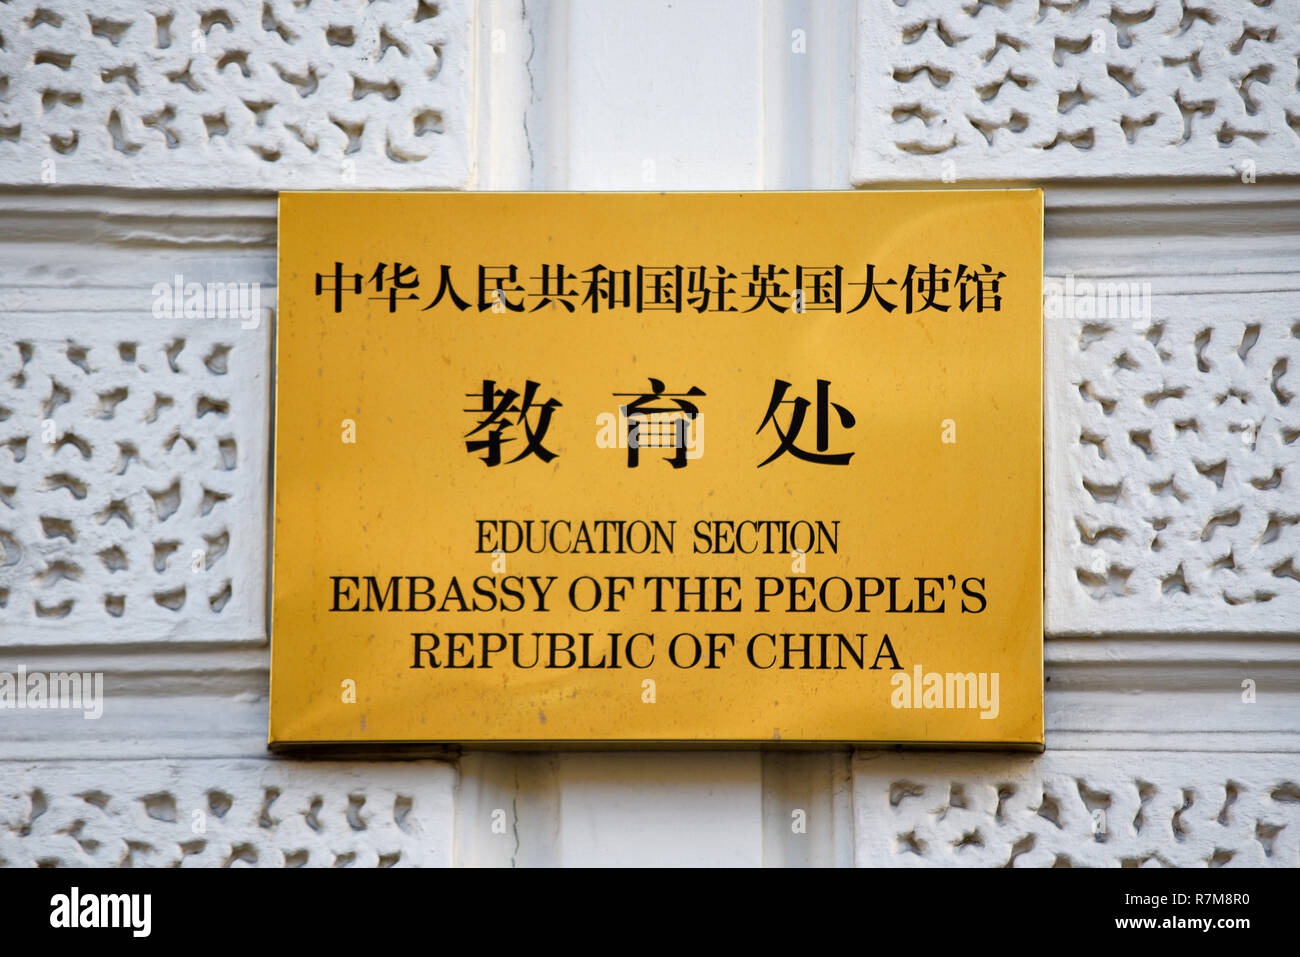 Embassy of the People's Republic of China, London, UK. Education Section. Chinese characters, writing. Wall mounted sign. Plaque. Notice Stock Photo